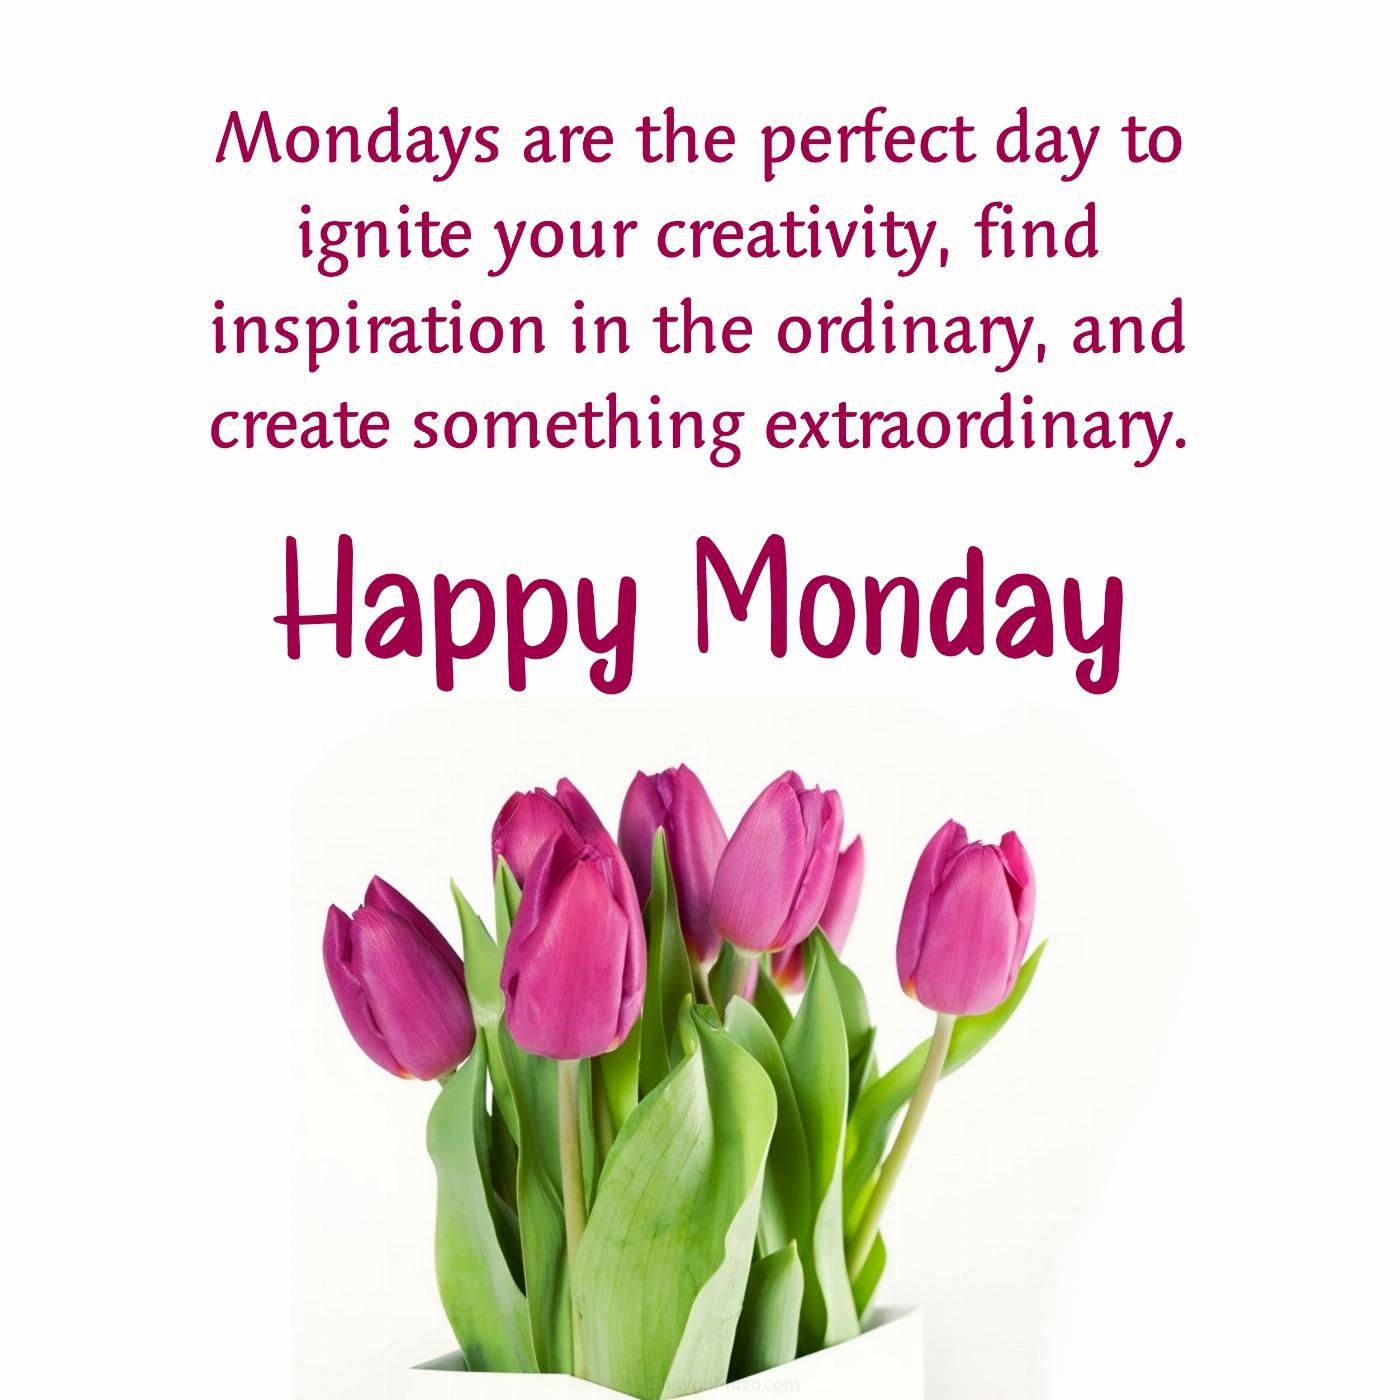 Mondays are the perfect day to ignite your creativity